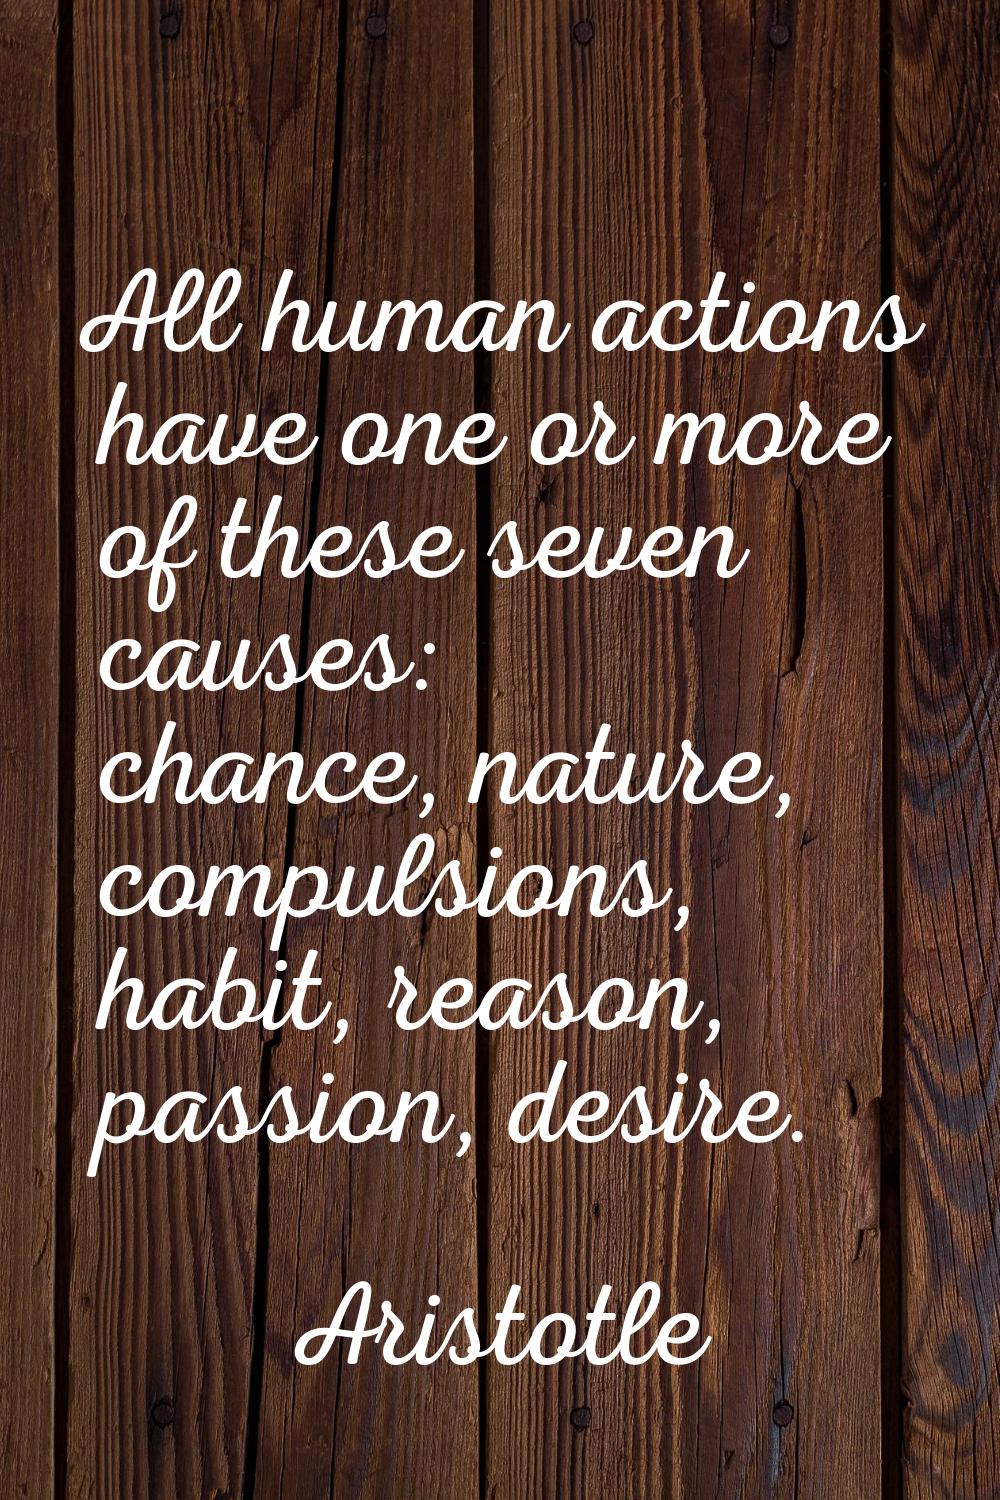 All human actions have one or more of these seven causes: chance, nature, compulsions, habit, reaso